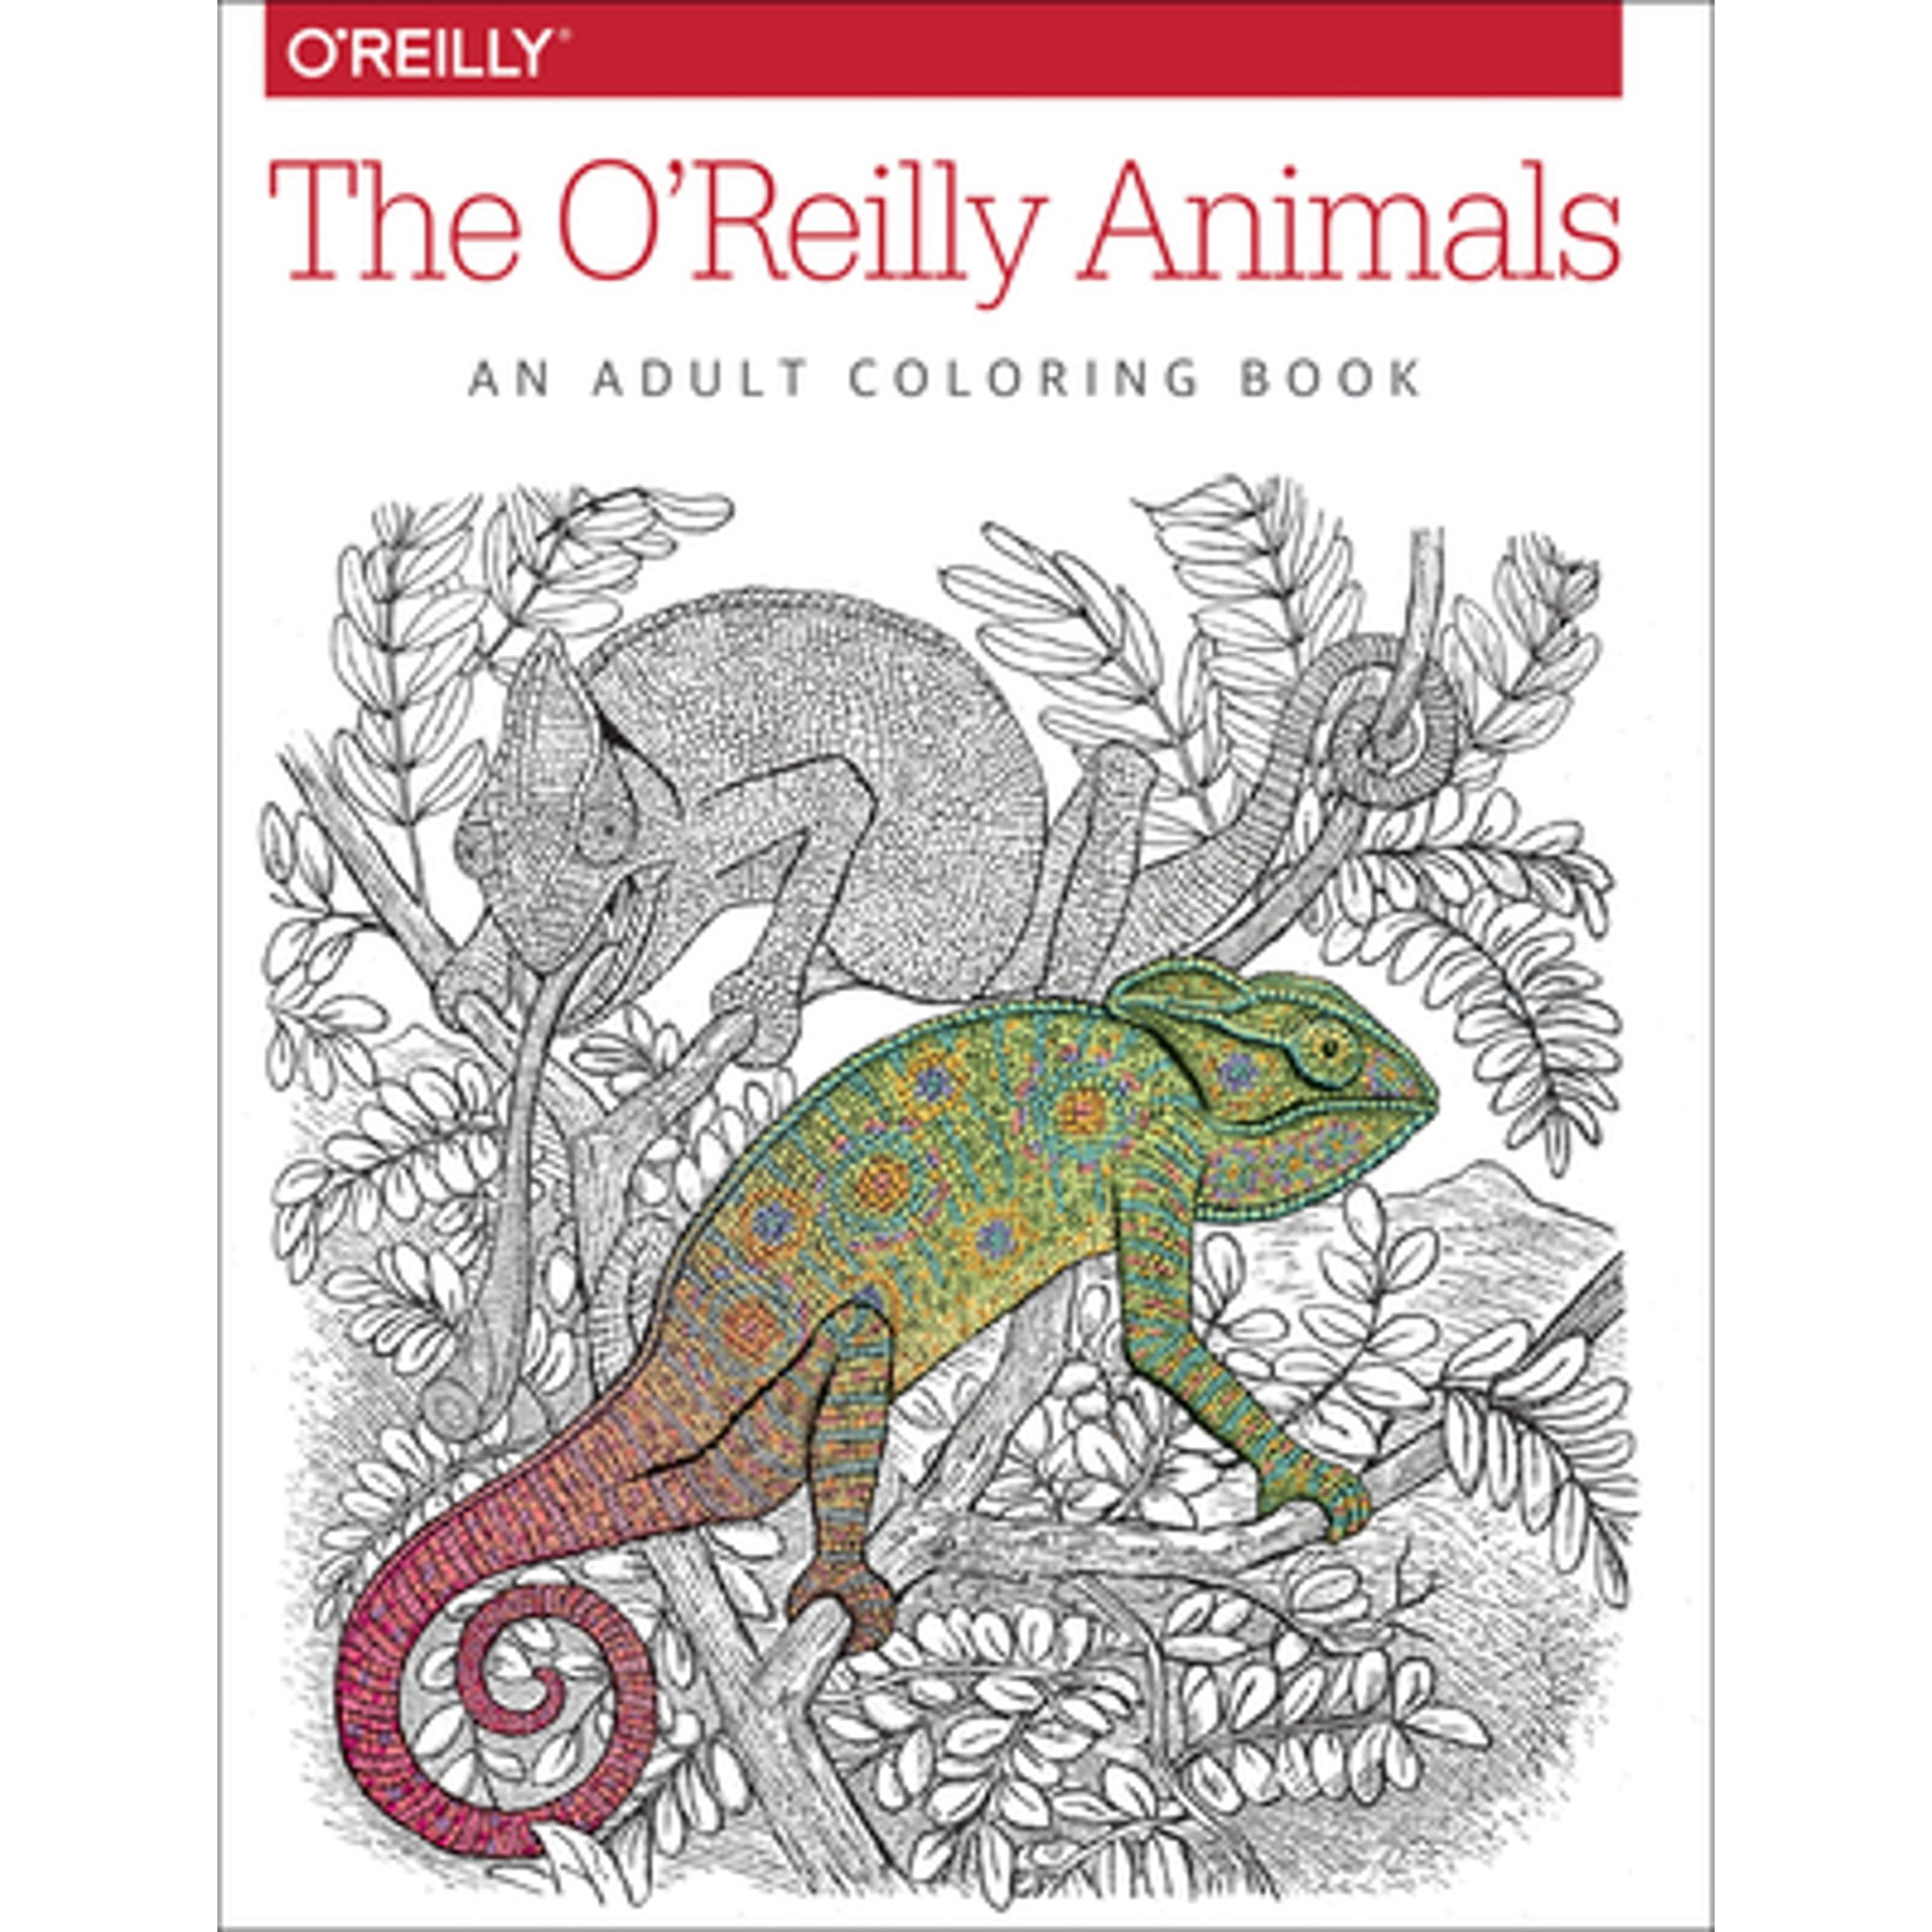 Pre-Owned The O'Reilly Animals: An Adult Coloring Book (Paperback) by O'Reilly Media